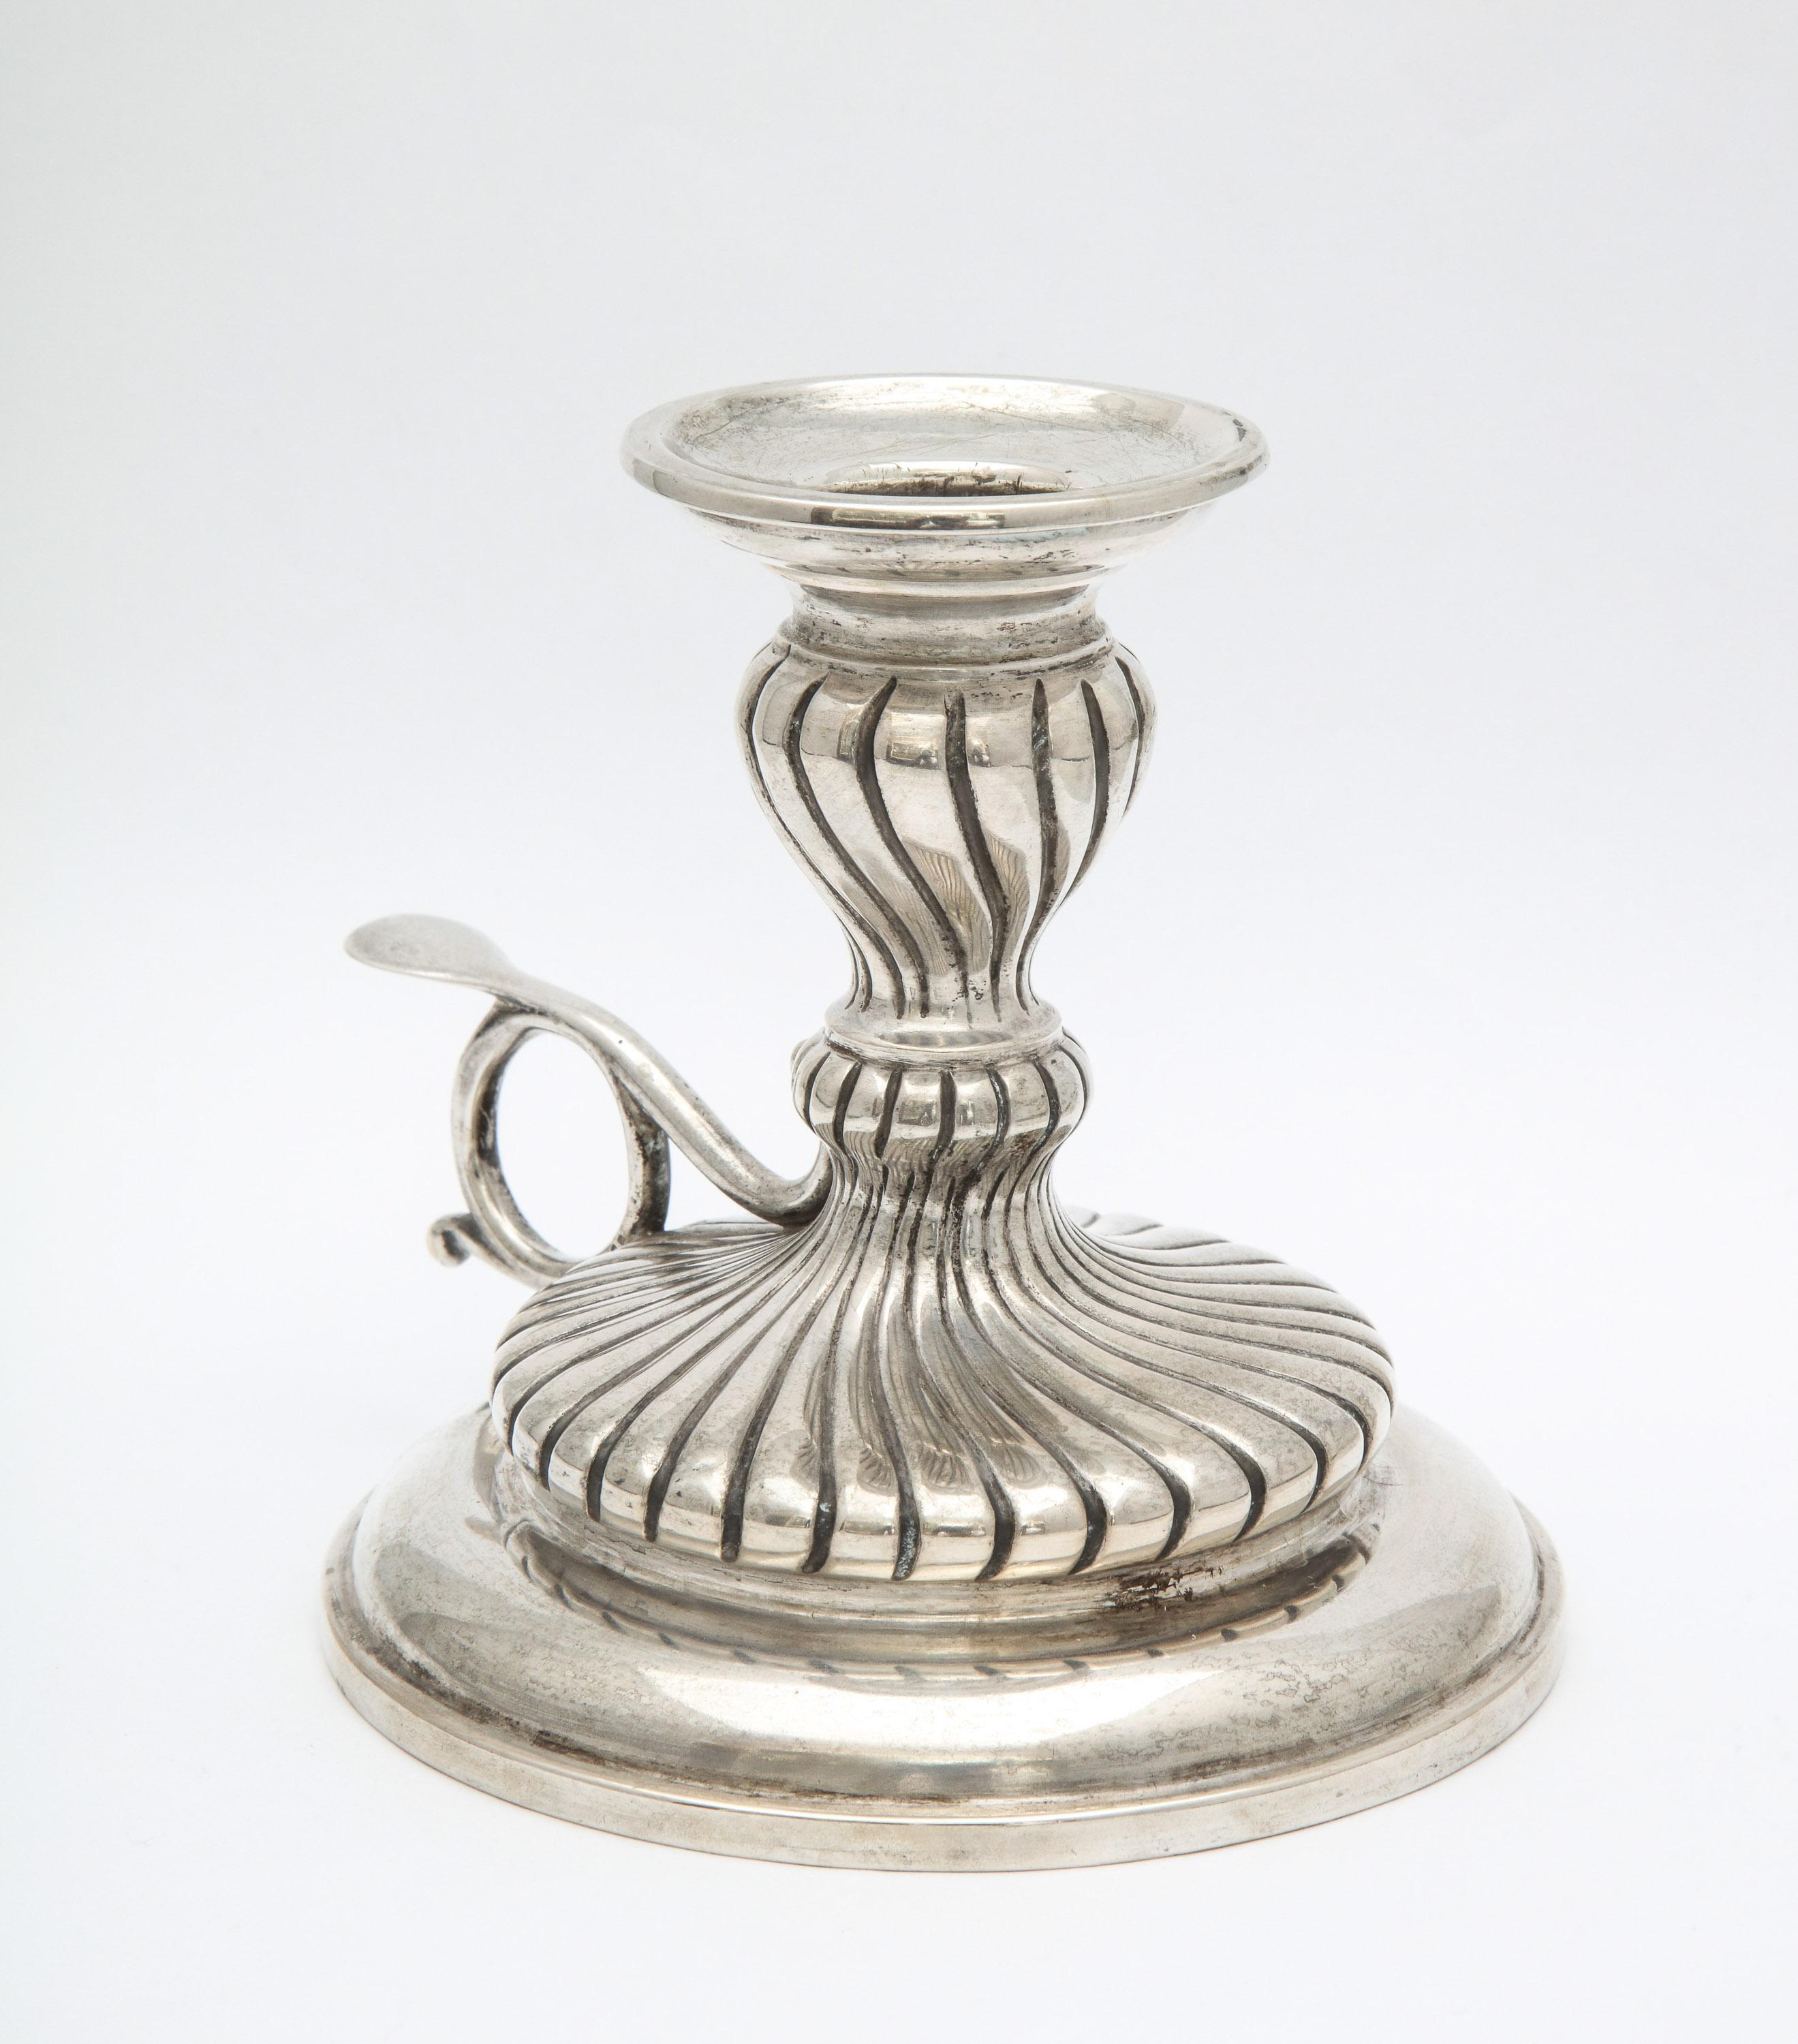 Neoclassical, continental silver (.835) chamber stick, Austria, circa 1900. Measures 4 1/2 inches high x 4 1/4 inches diameter. Weighs 7.380 troy ounces. Dark spots in photos are reflections. Excellent condition.